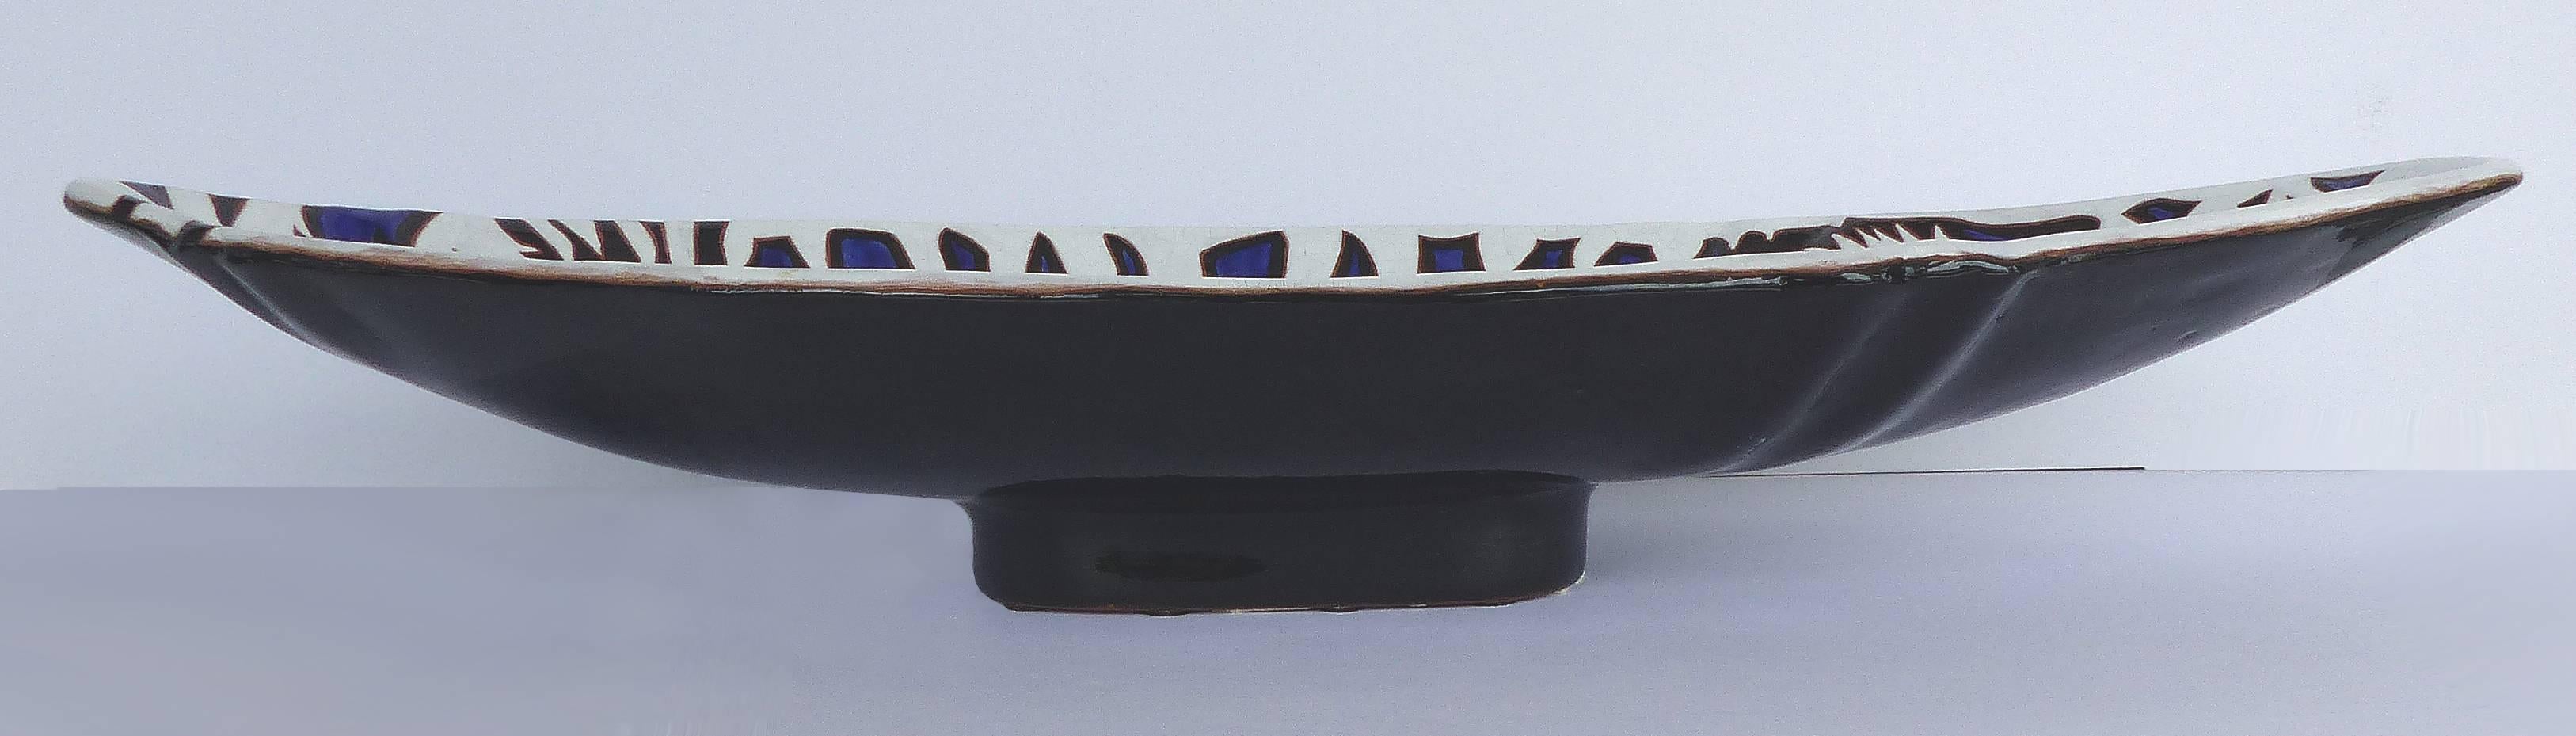 Offered for sale is an original Jean Lurçat glazed ceramic elongated footed tray produced at the atelier Saint-Vincent, France. Signed and numbered on the underside, this tray is 50 from an edition of 50 and dates from the mid-20th century.